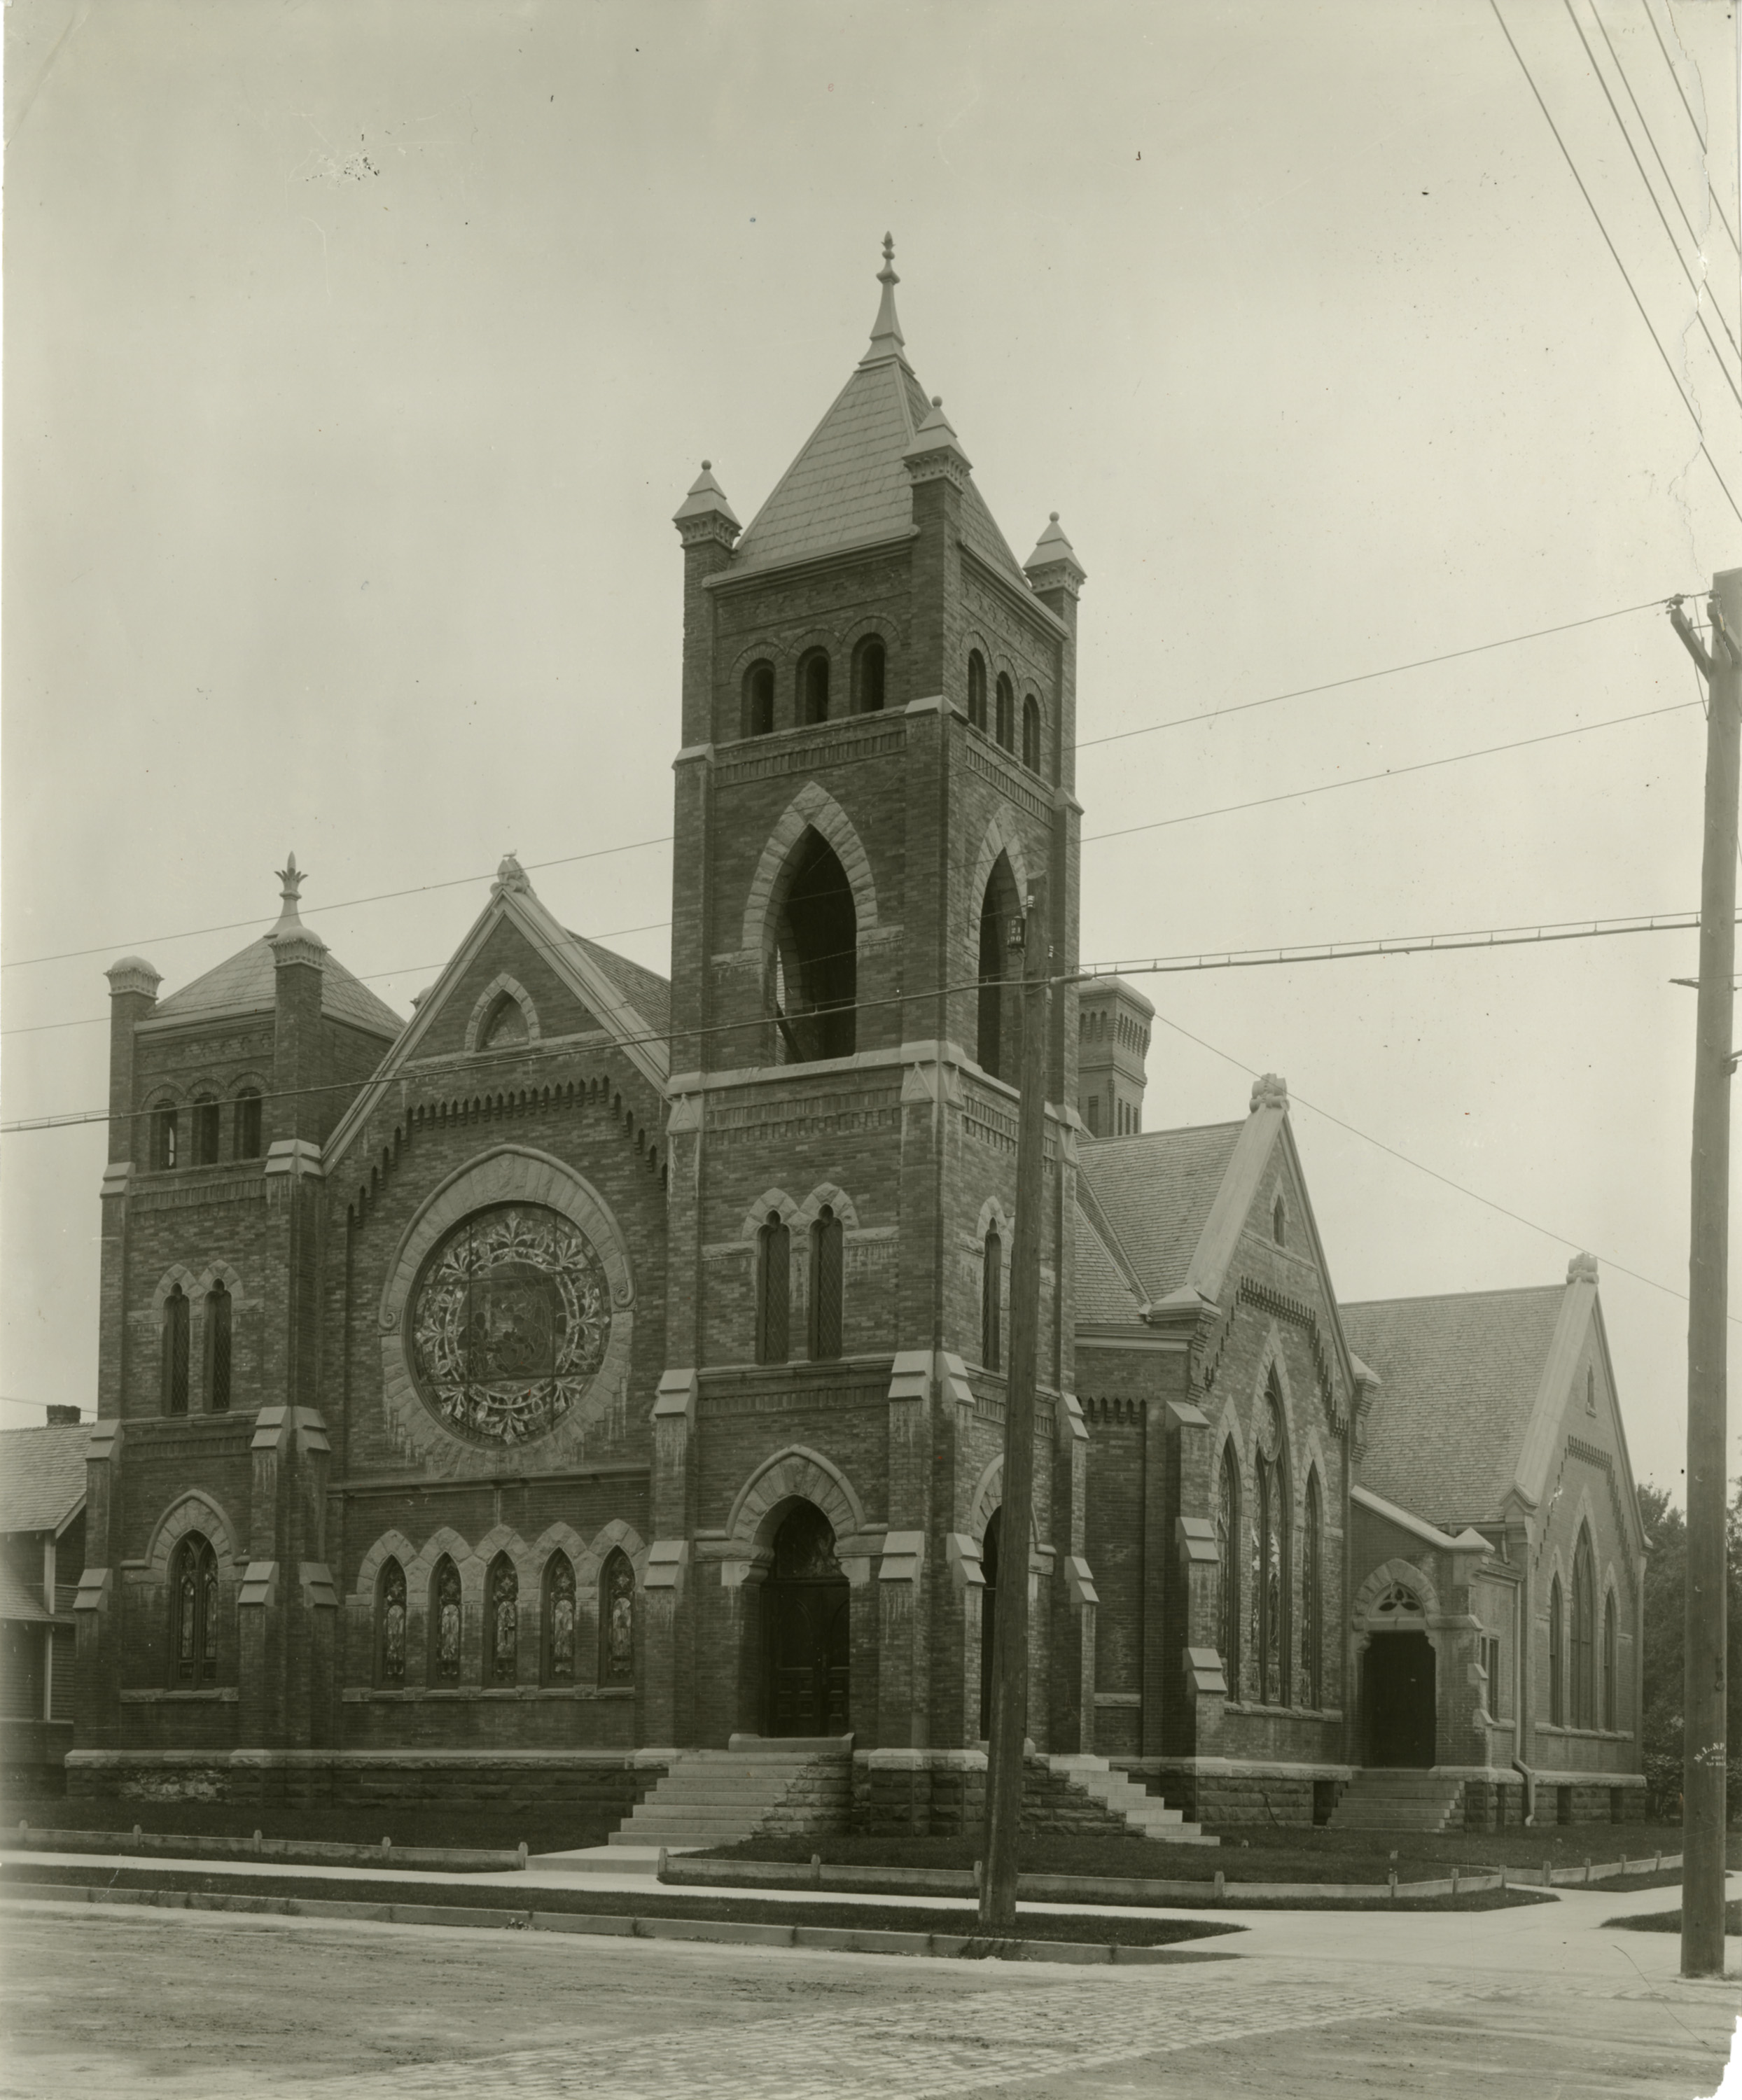 Ogden Churches and Schools